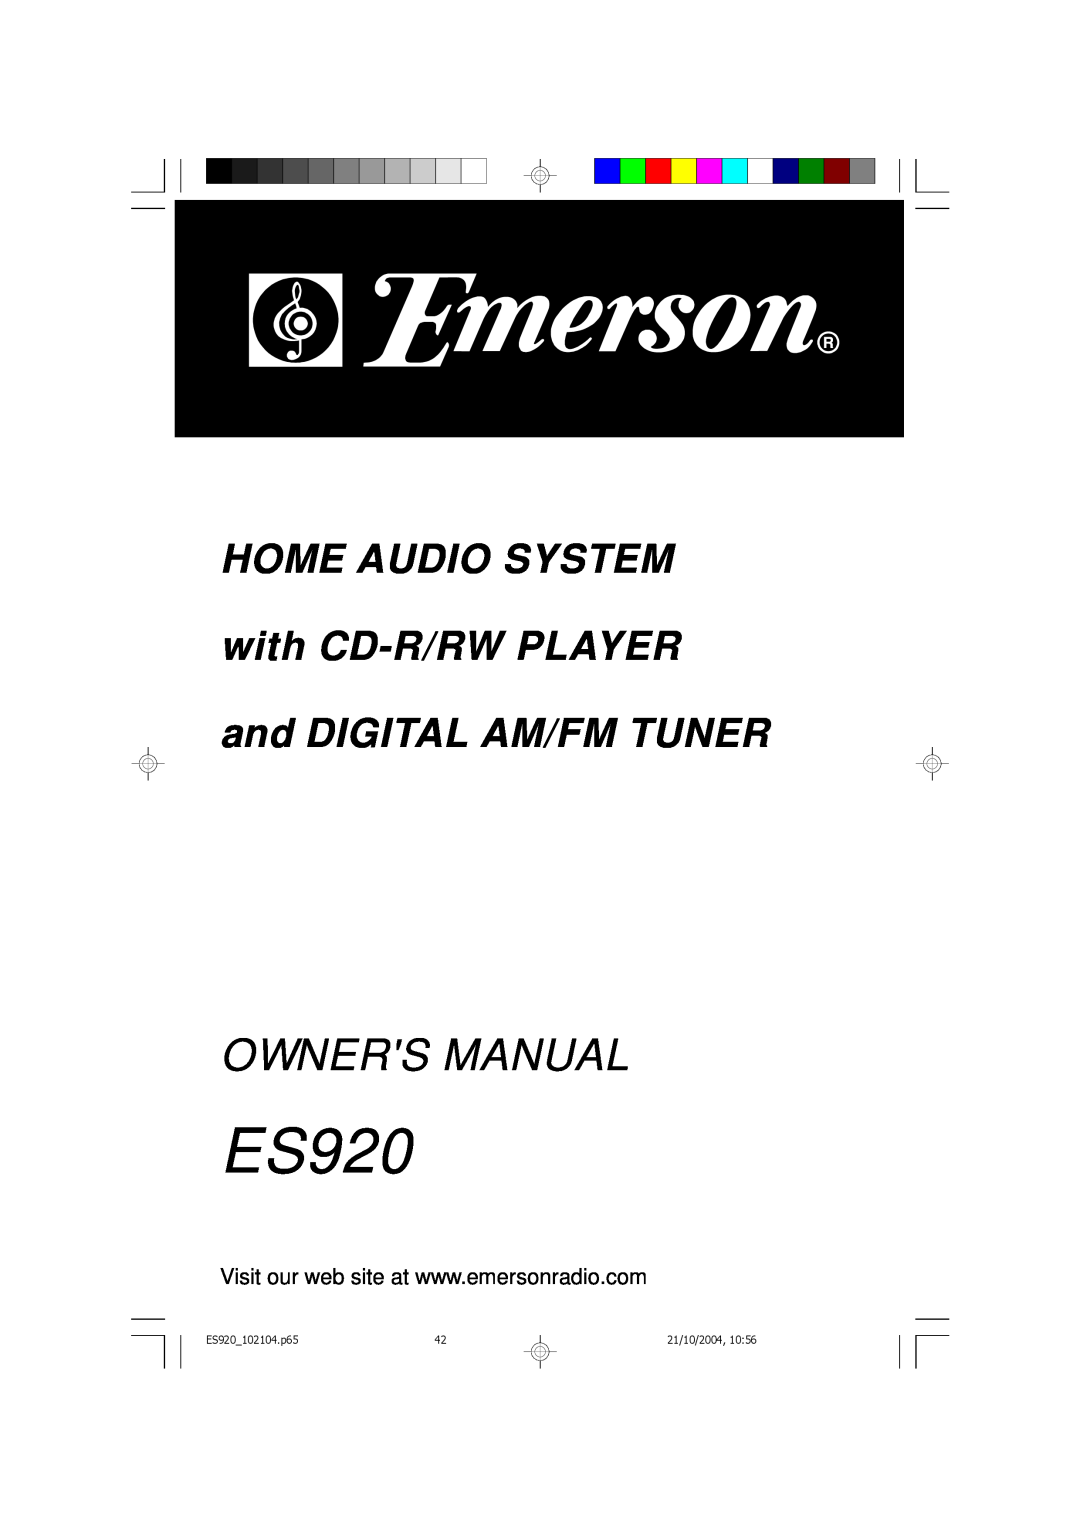 Emerson owner manual HOME AUDIO SYSTEM with CD-R/RWPLAYER, and DIGITAL AM/FM TUNER, ES920 102104.p65, 21/10/2004 